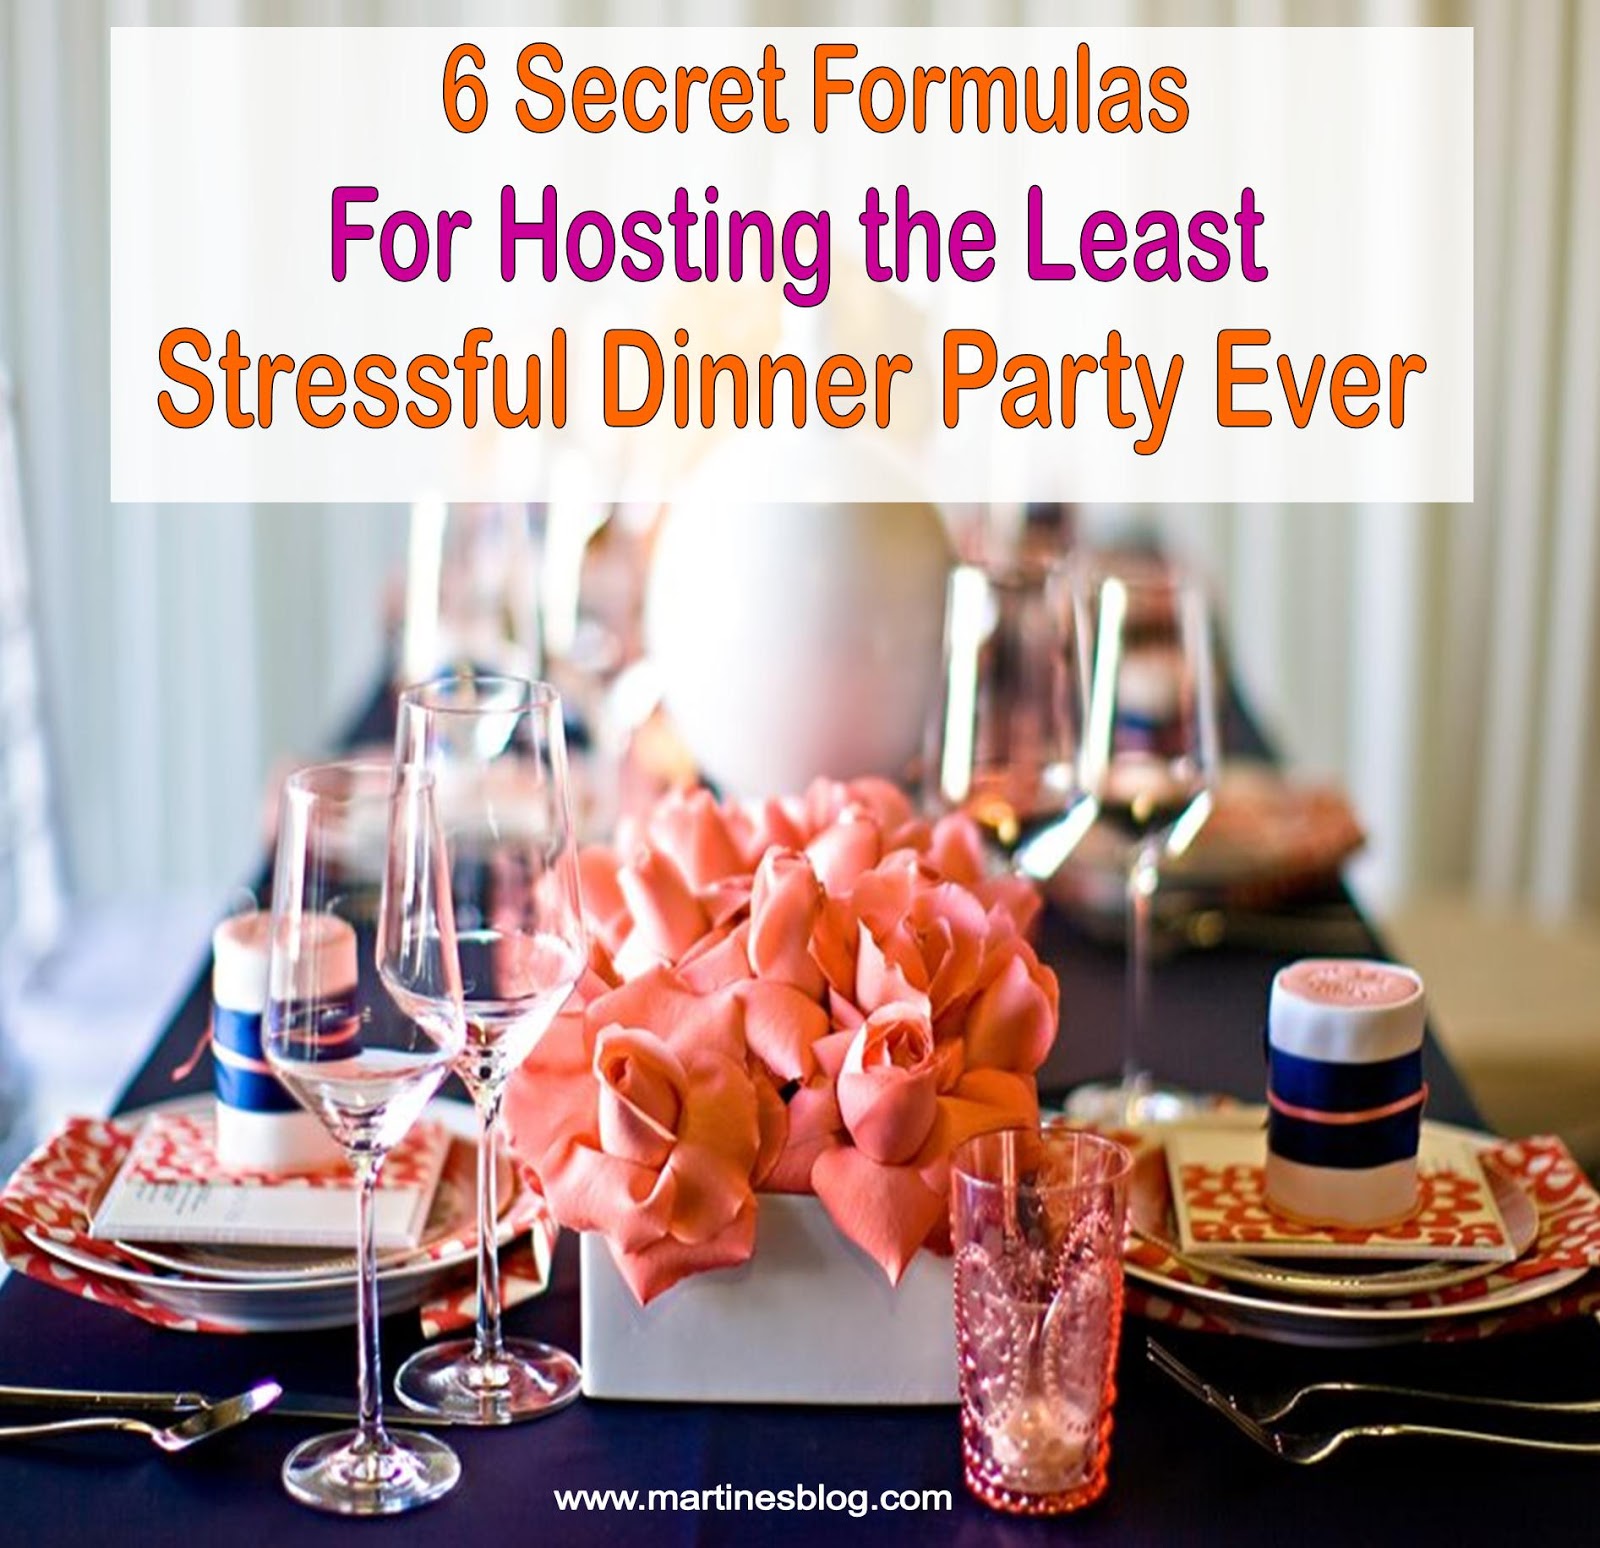 Whether your next gathering is an intimate dinner or a buffet for a crowd. Here are 6 secret formulas for hosting the least stressful dinner party ever.